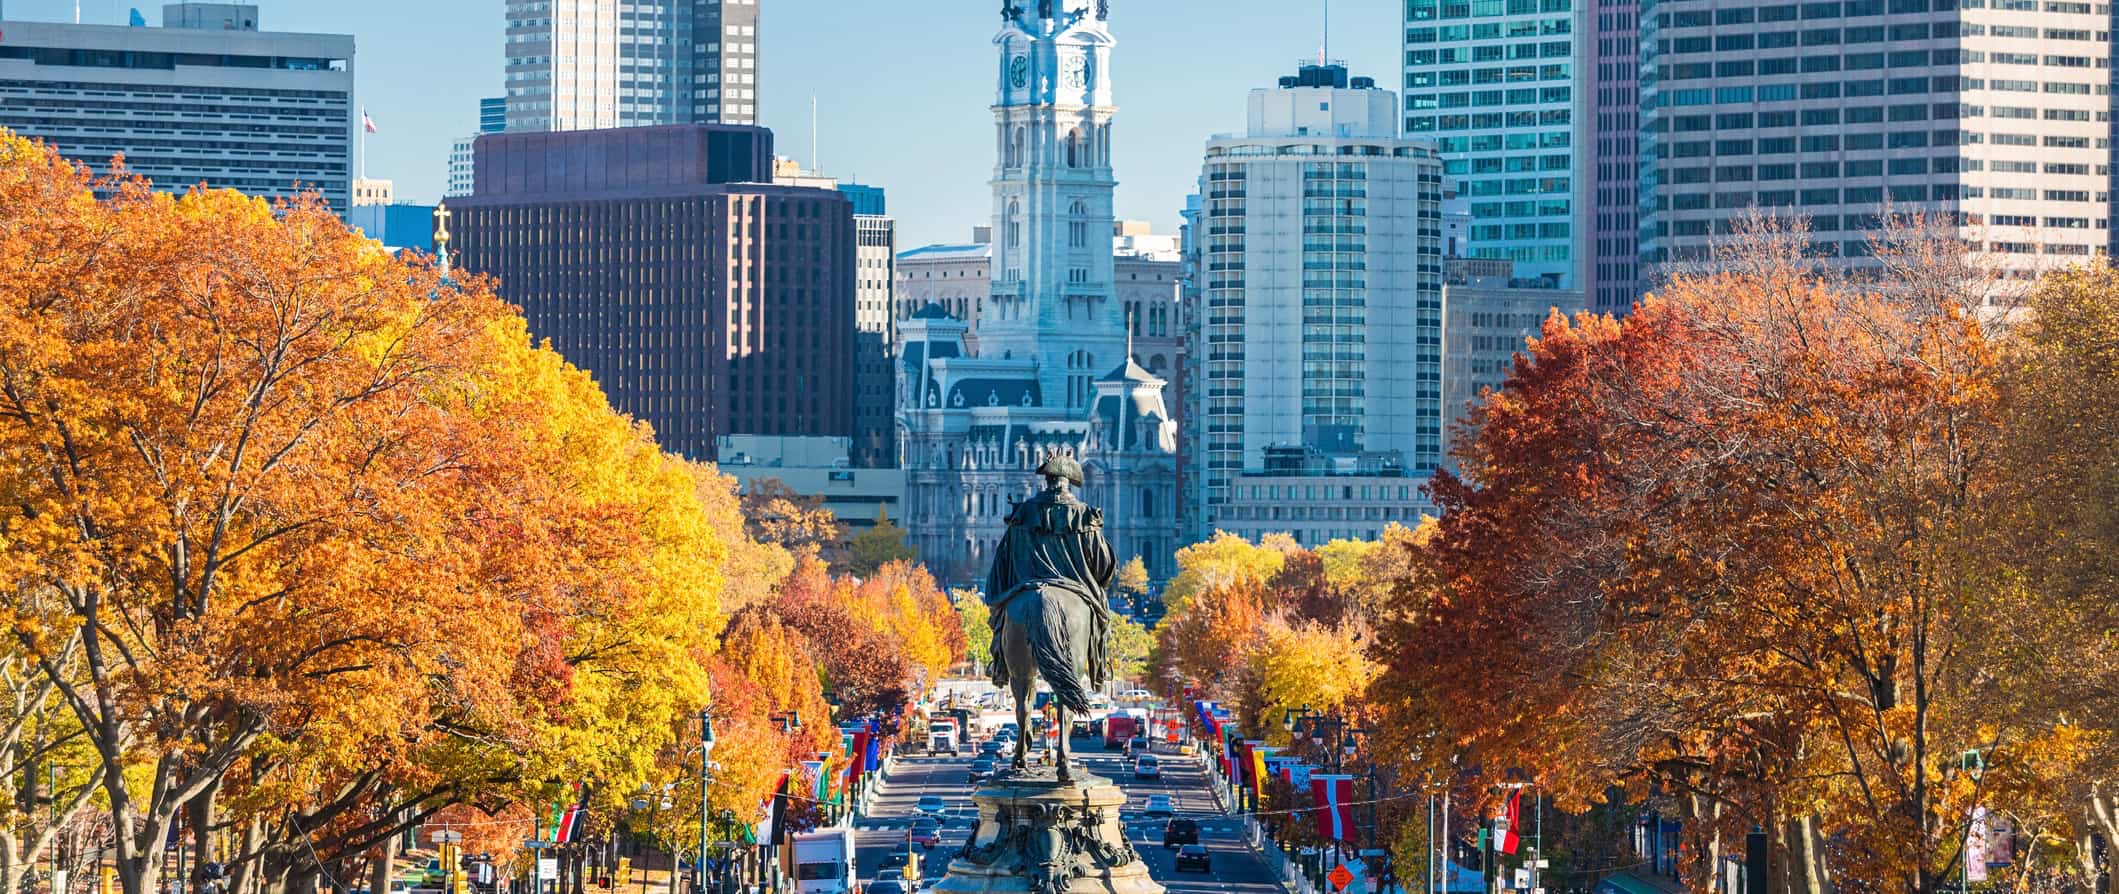 A statue of William Penn in bus downtown Philadelphia, USA